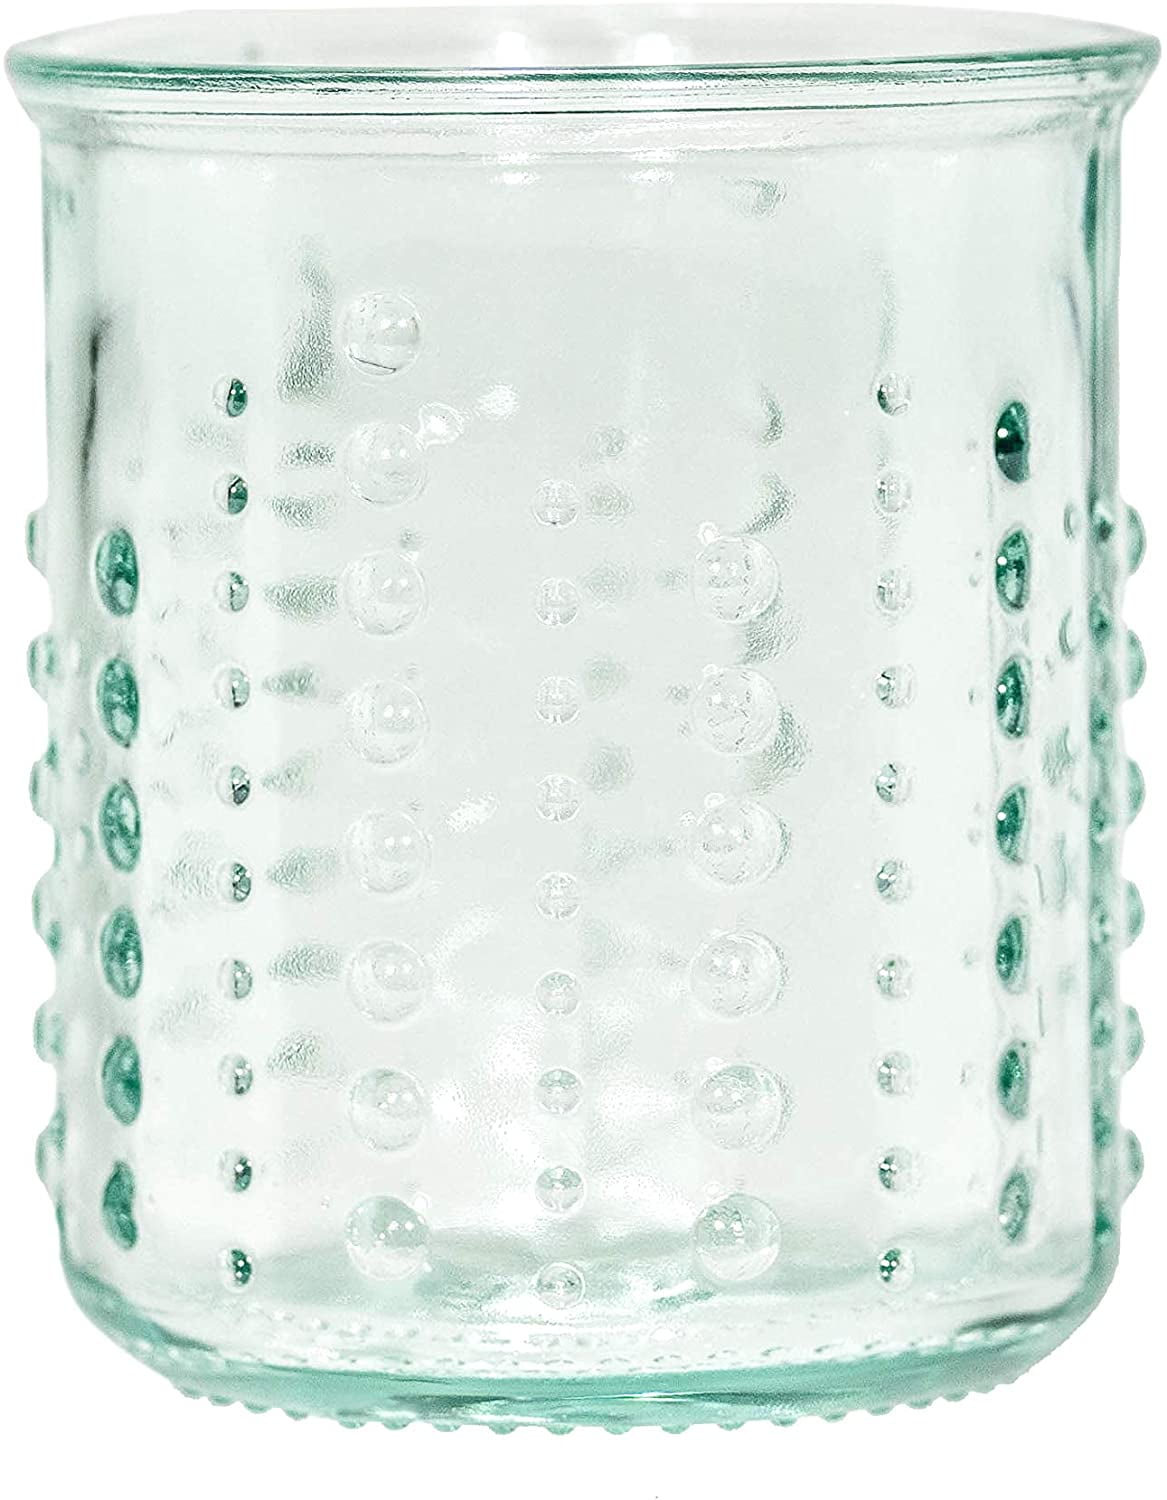 Amici Home Italian Recycled Green Regina Hiball Glass, Drinking Glassware  with Green Tint, Embossed Bee Design, Set of 6,18-Ounce